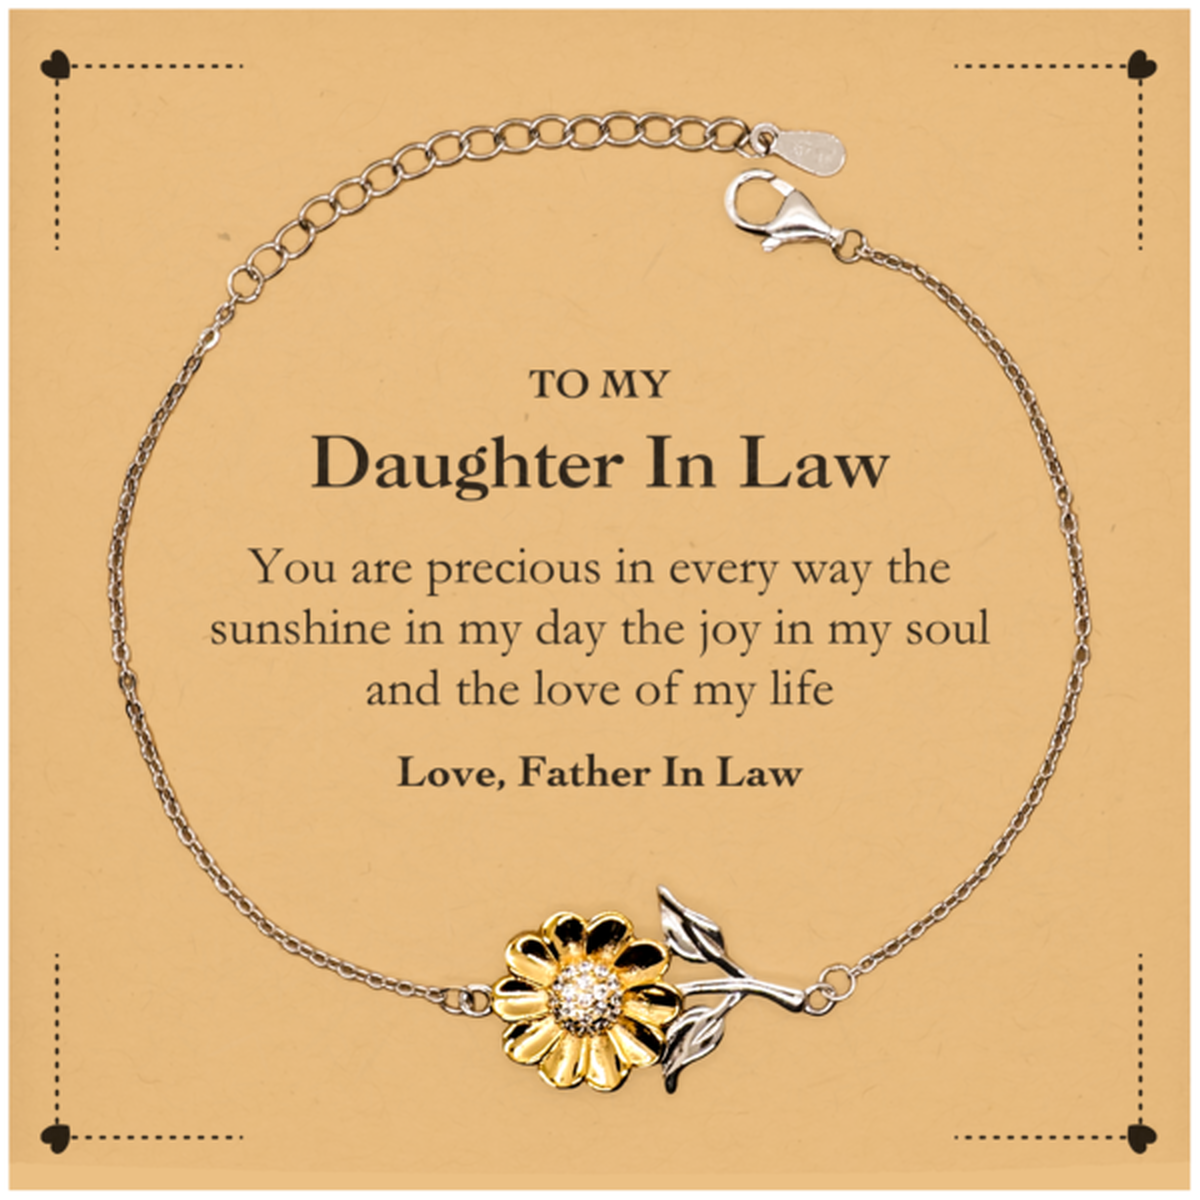 Graduation Gifts for Daughter In Law Sunflower Bracelet Present from Father In Law, Christmas Daughter In Law Birthday Gifts Daughter In Law You are precious in every way the sunshine in my day. Love, Father In Law